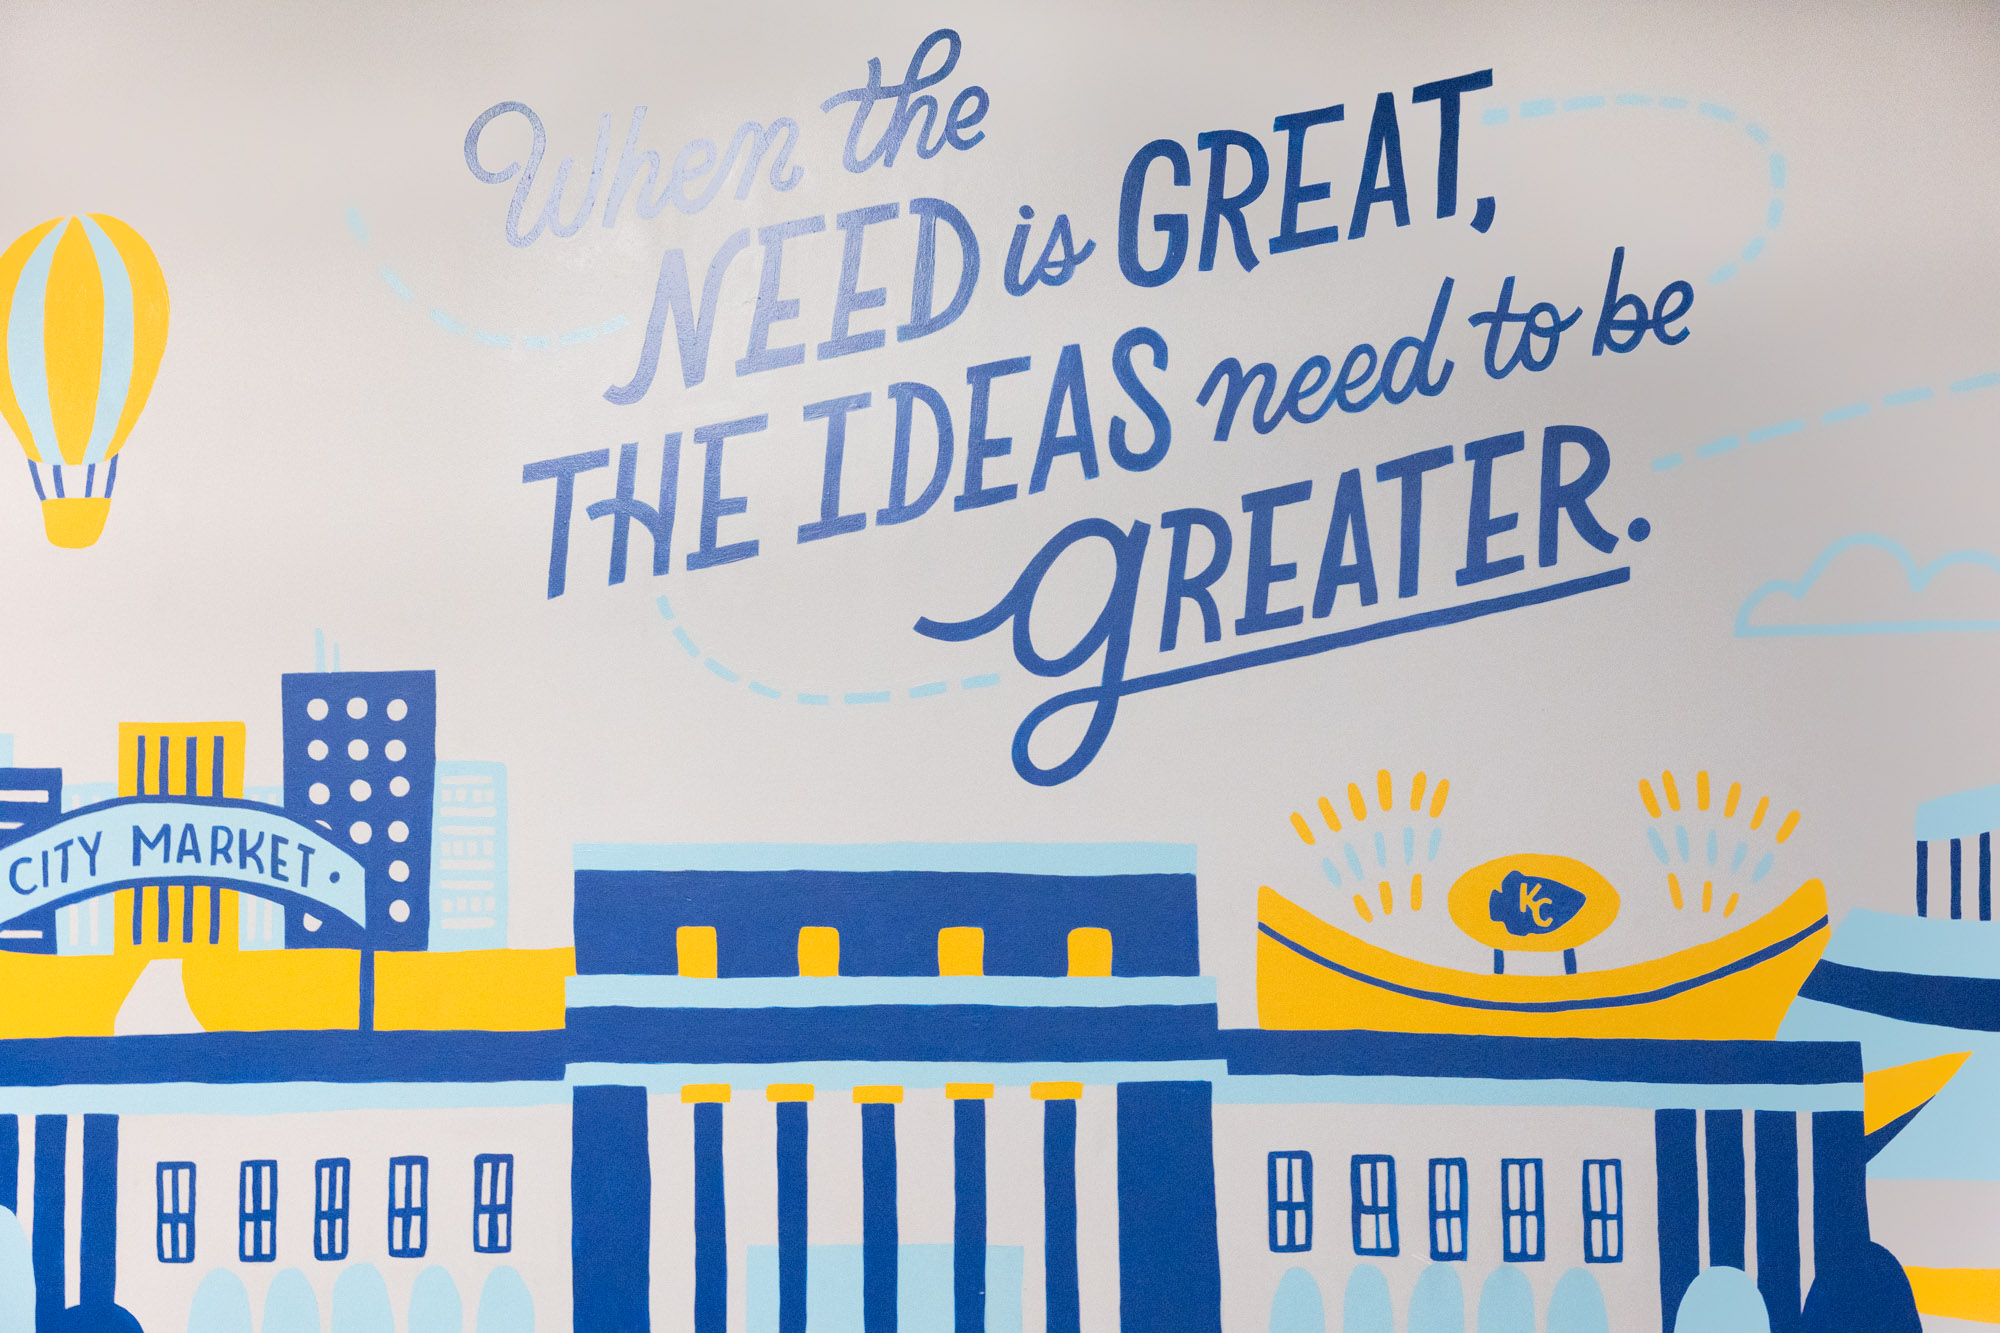 “When the need is great, the ideas need to be greater” quote on wall in peds gym